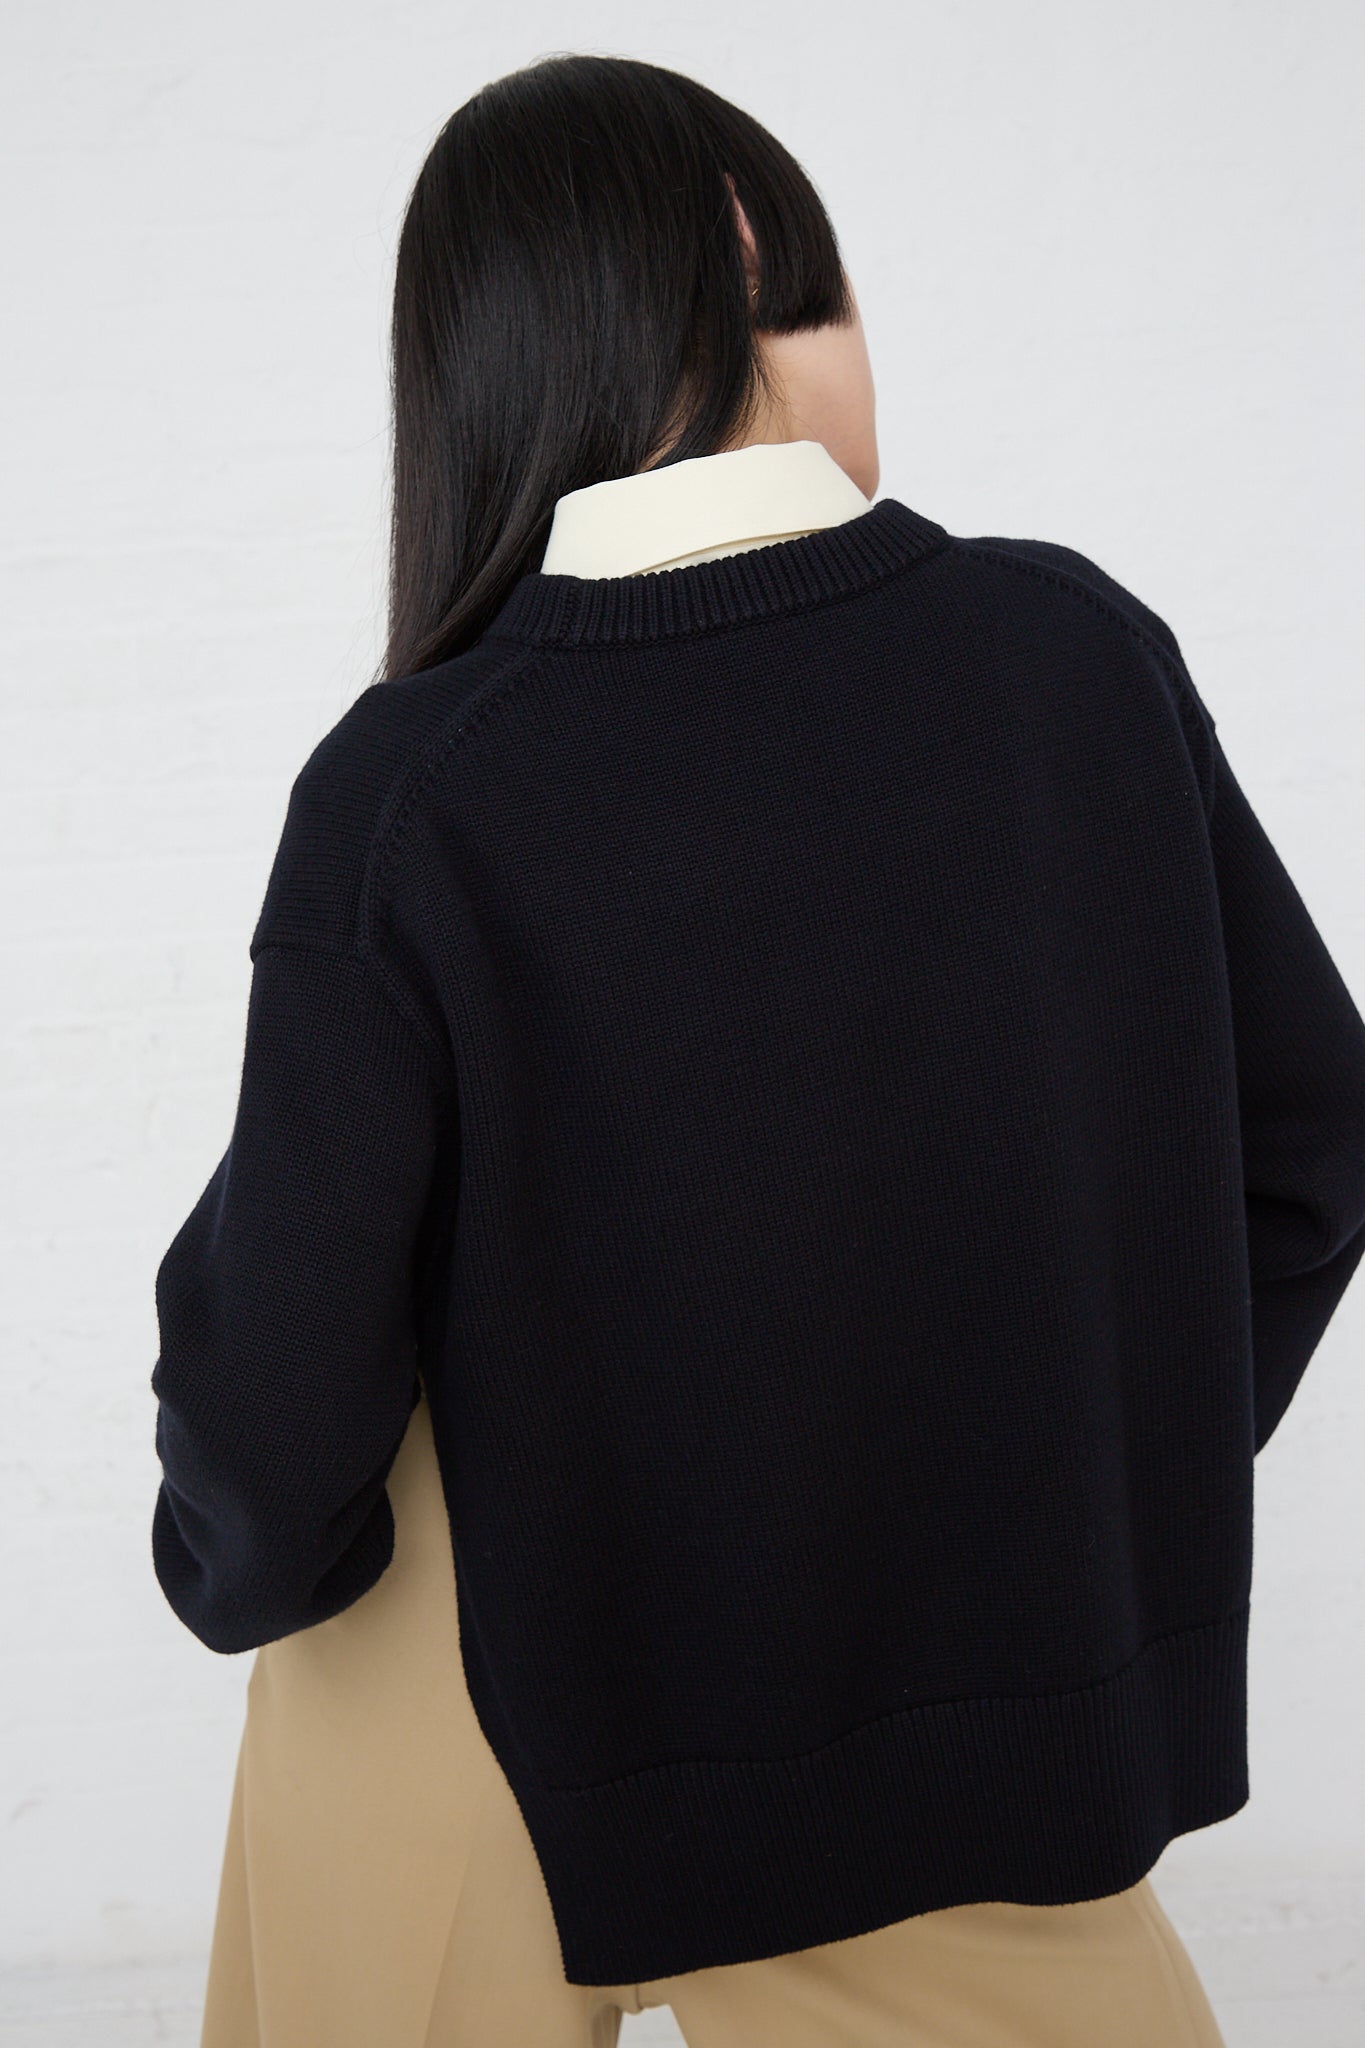 The back of a woman wearing a Studio Nicholson Merino Cotton Hima Side Split Crew Neck in Dark Navy with ribbed hem and cuffs.